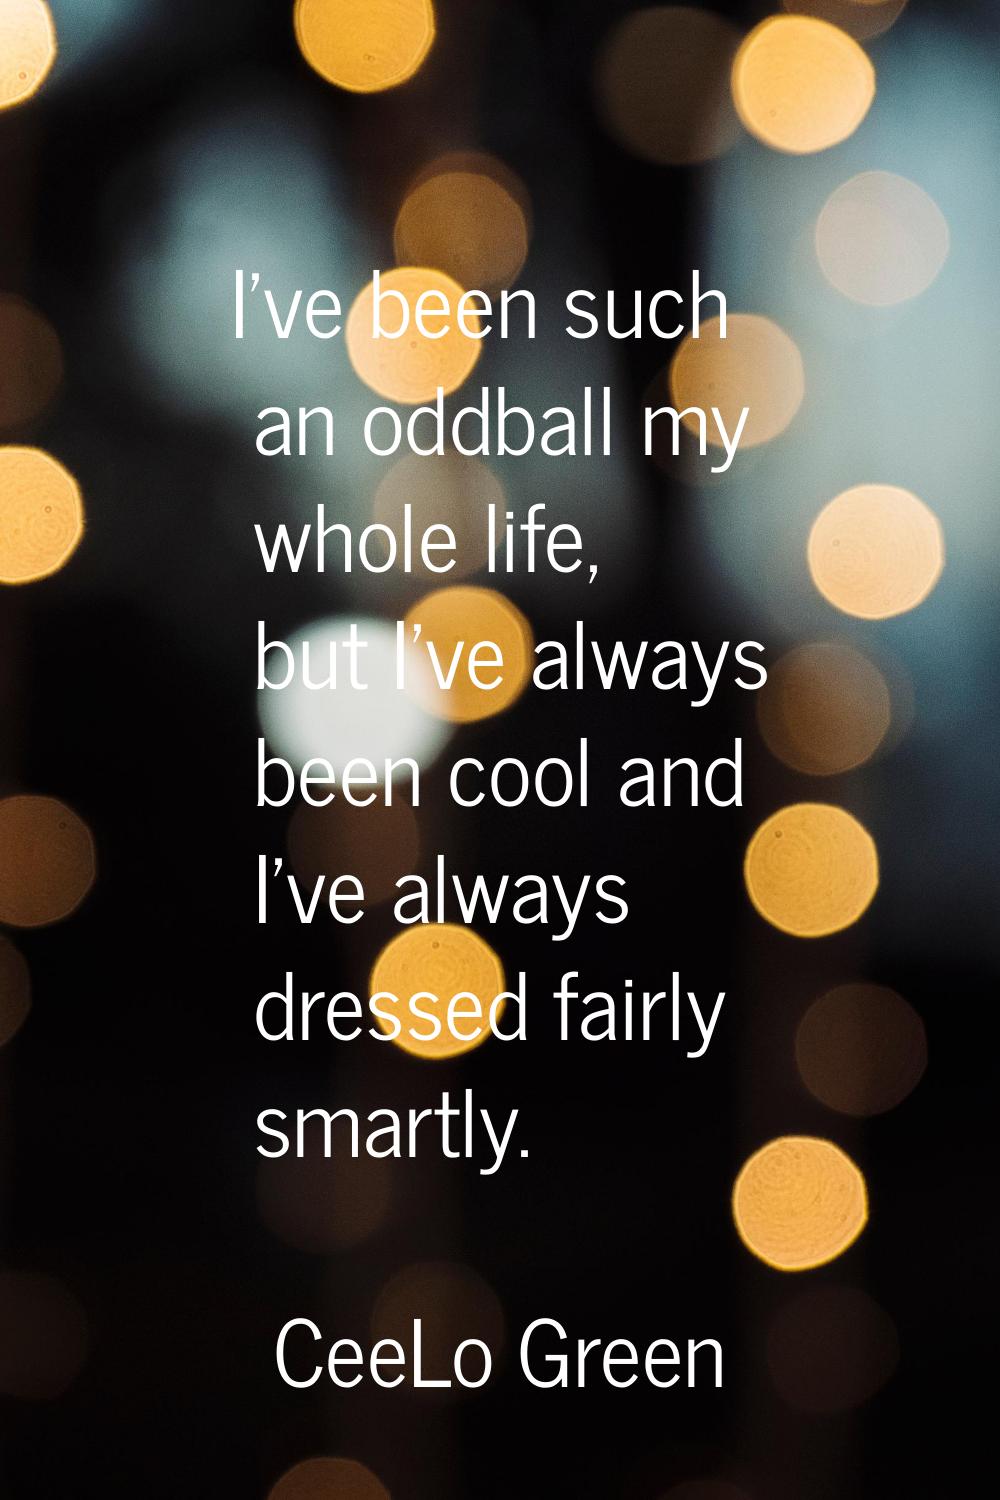 I've been such an oddball my whole life, but I've always been cool and I've always dressed fairly s